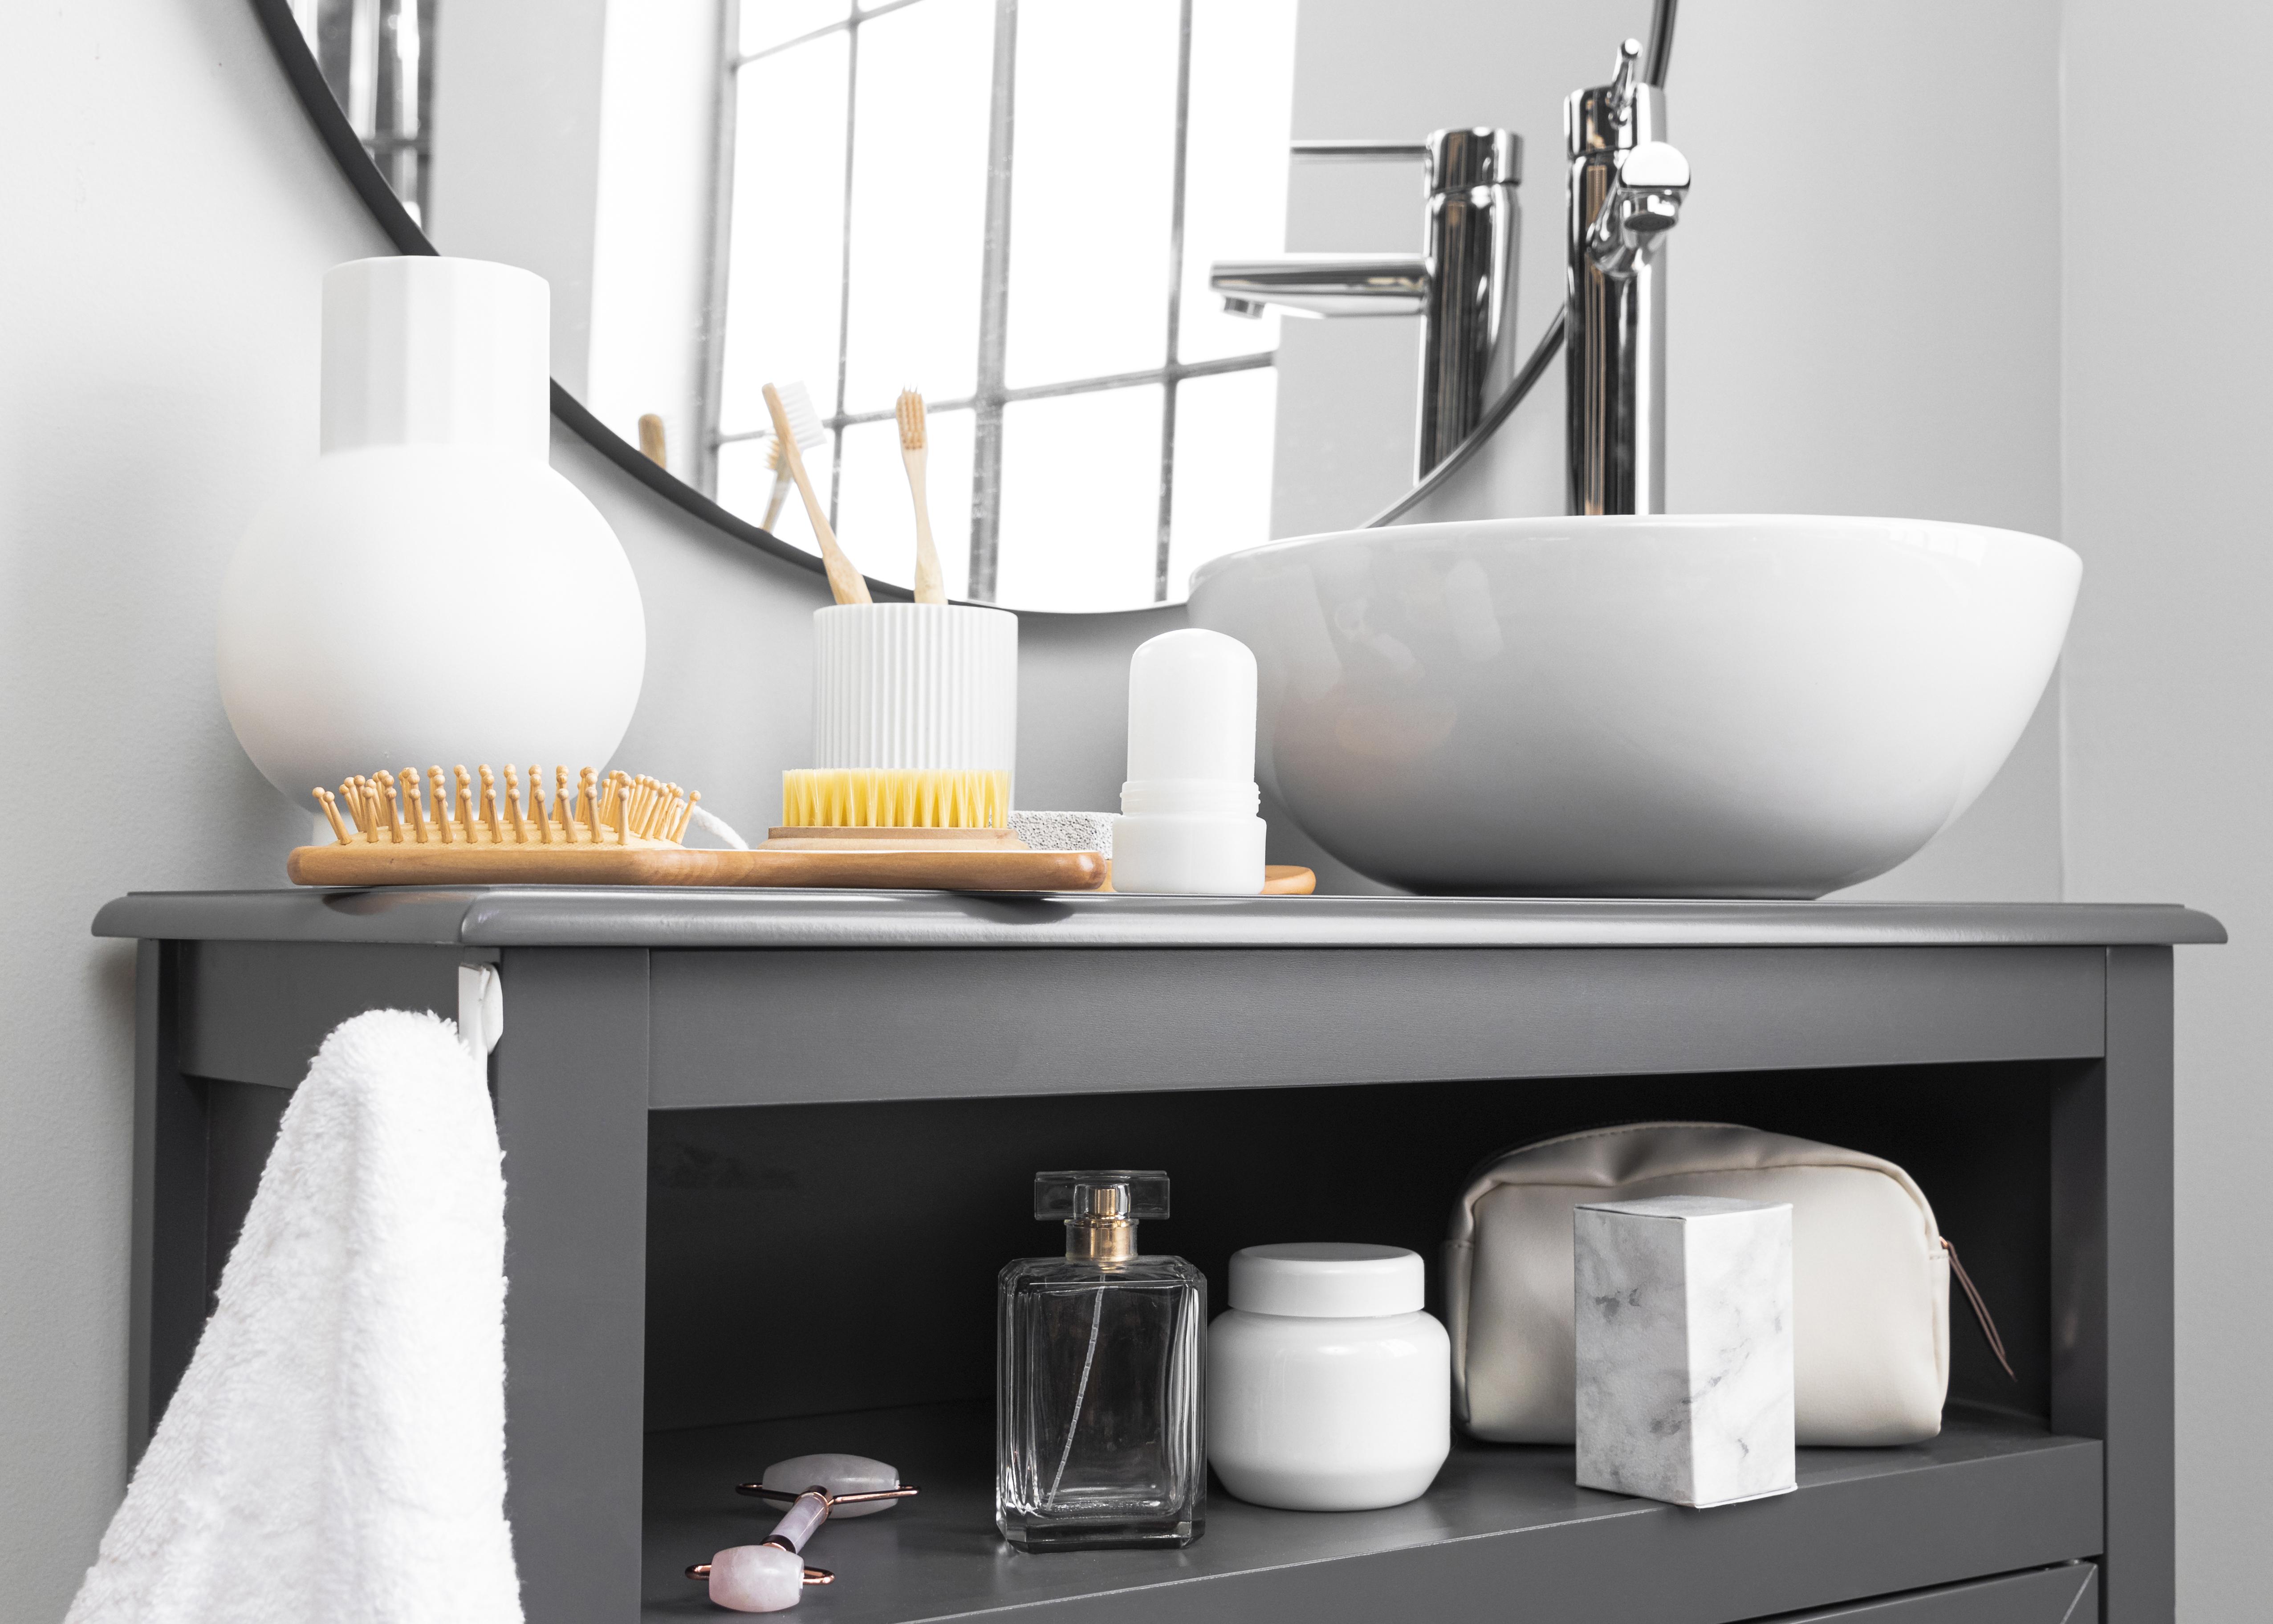 10 Reasons to Decorate Your Bathroom with Quality Products Purchased from CeramicStore